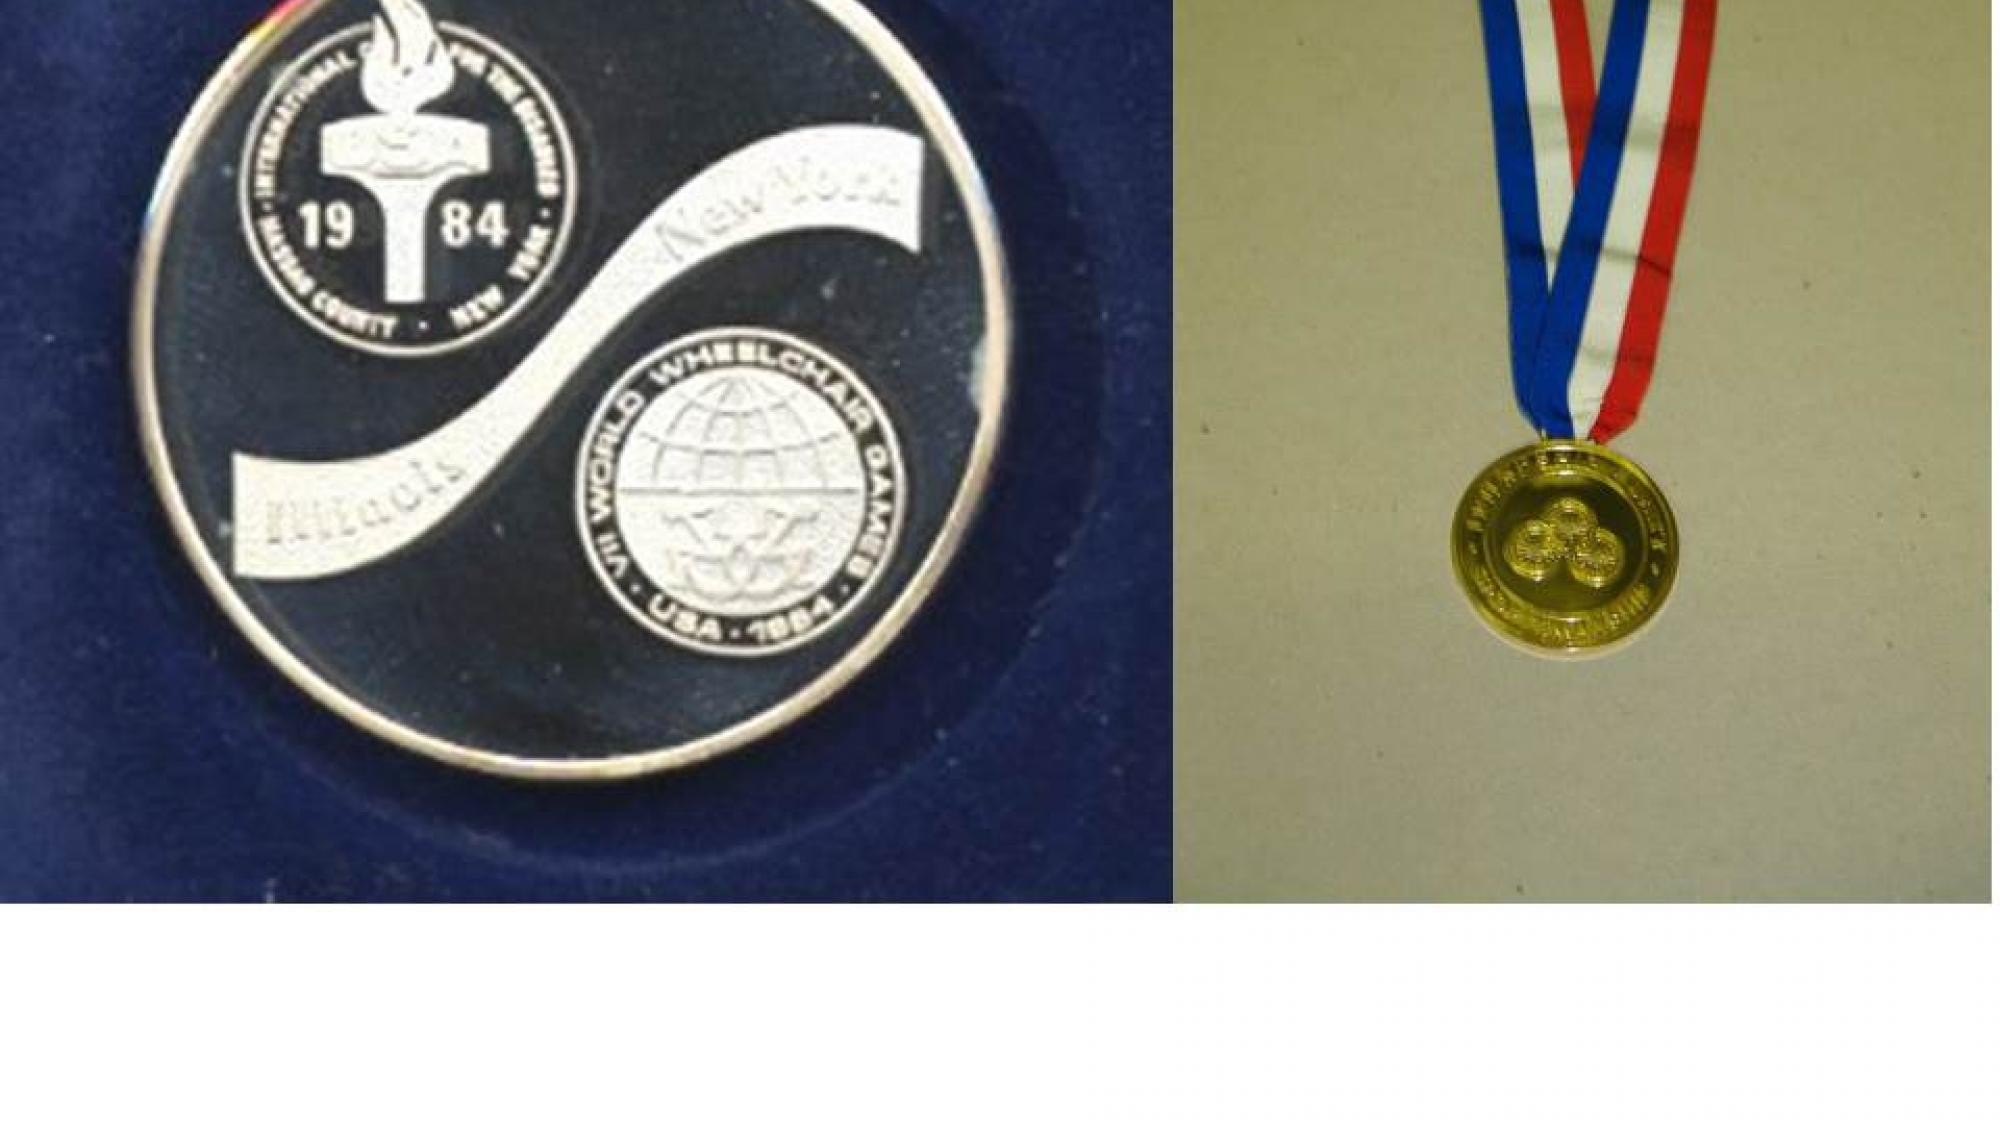 New York / Stoke Mandeville 1984 Paralympic medals